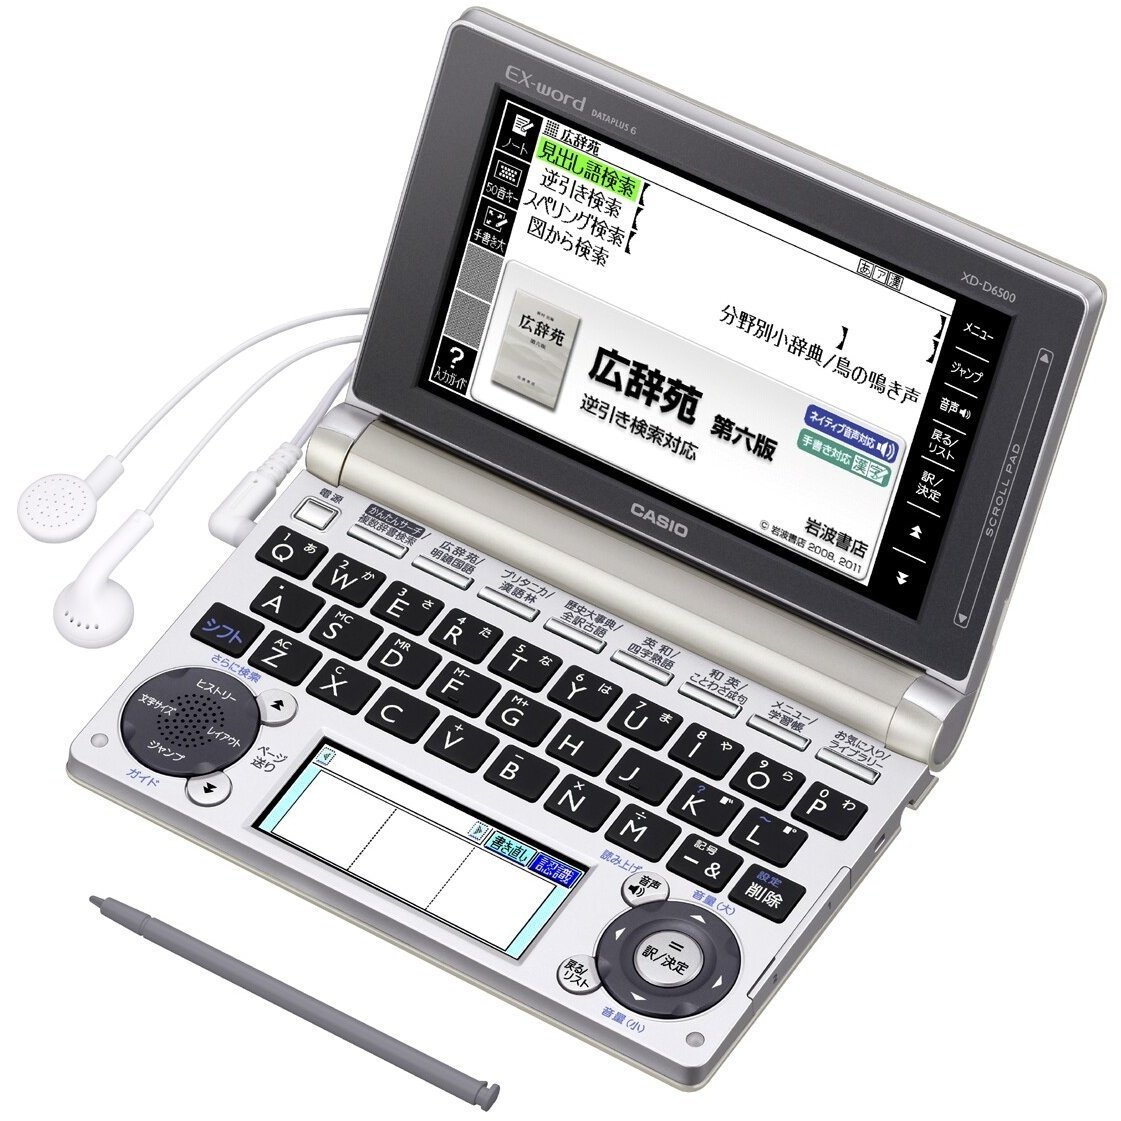 CASIO EX-word XD-D6500GD Japanese English Electronic Dictionary